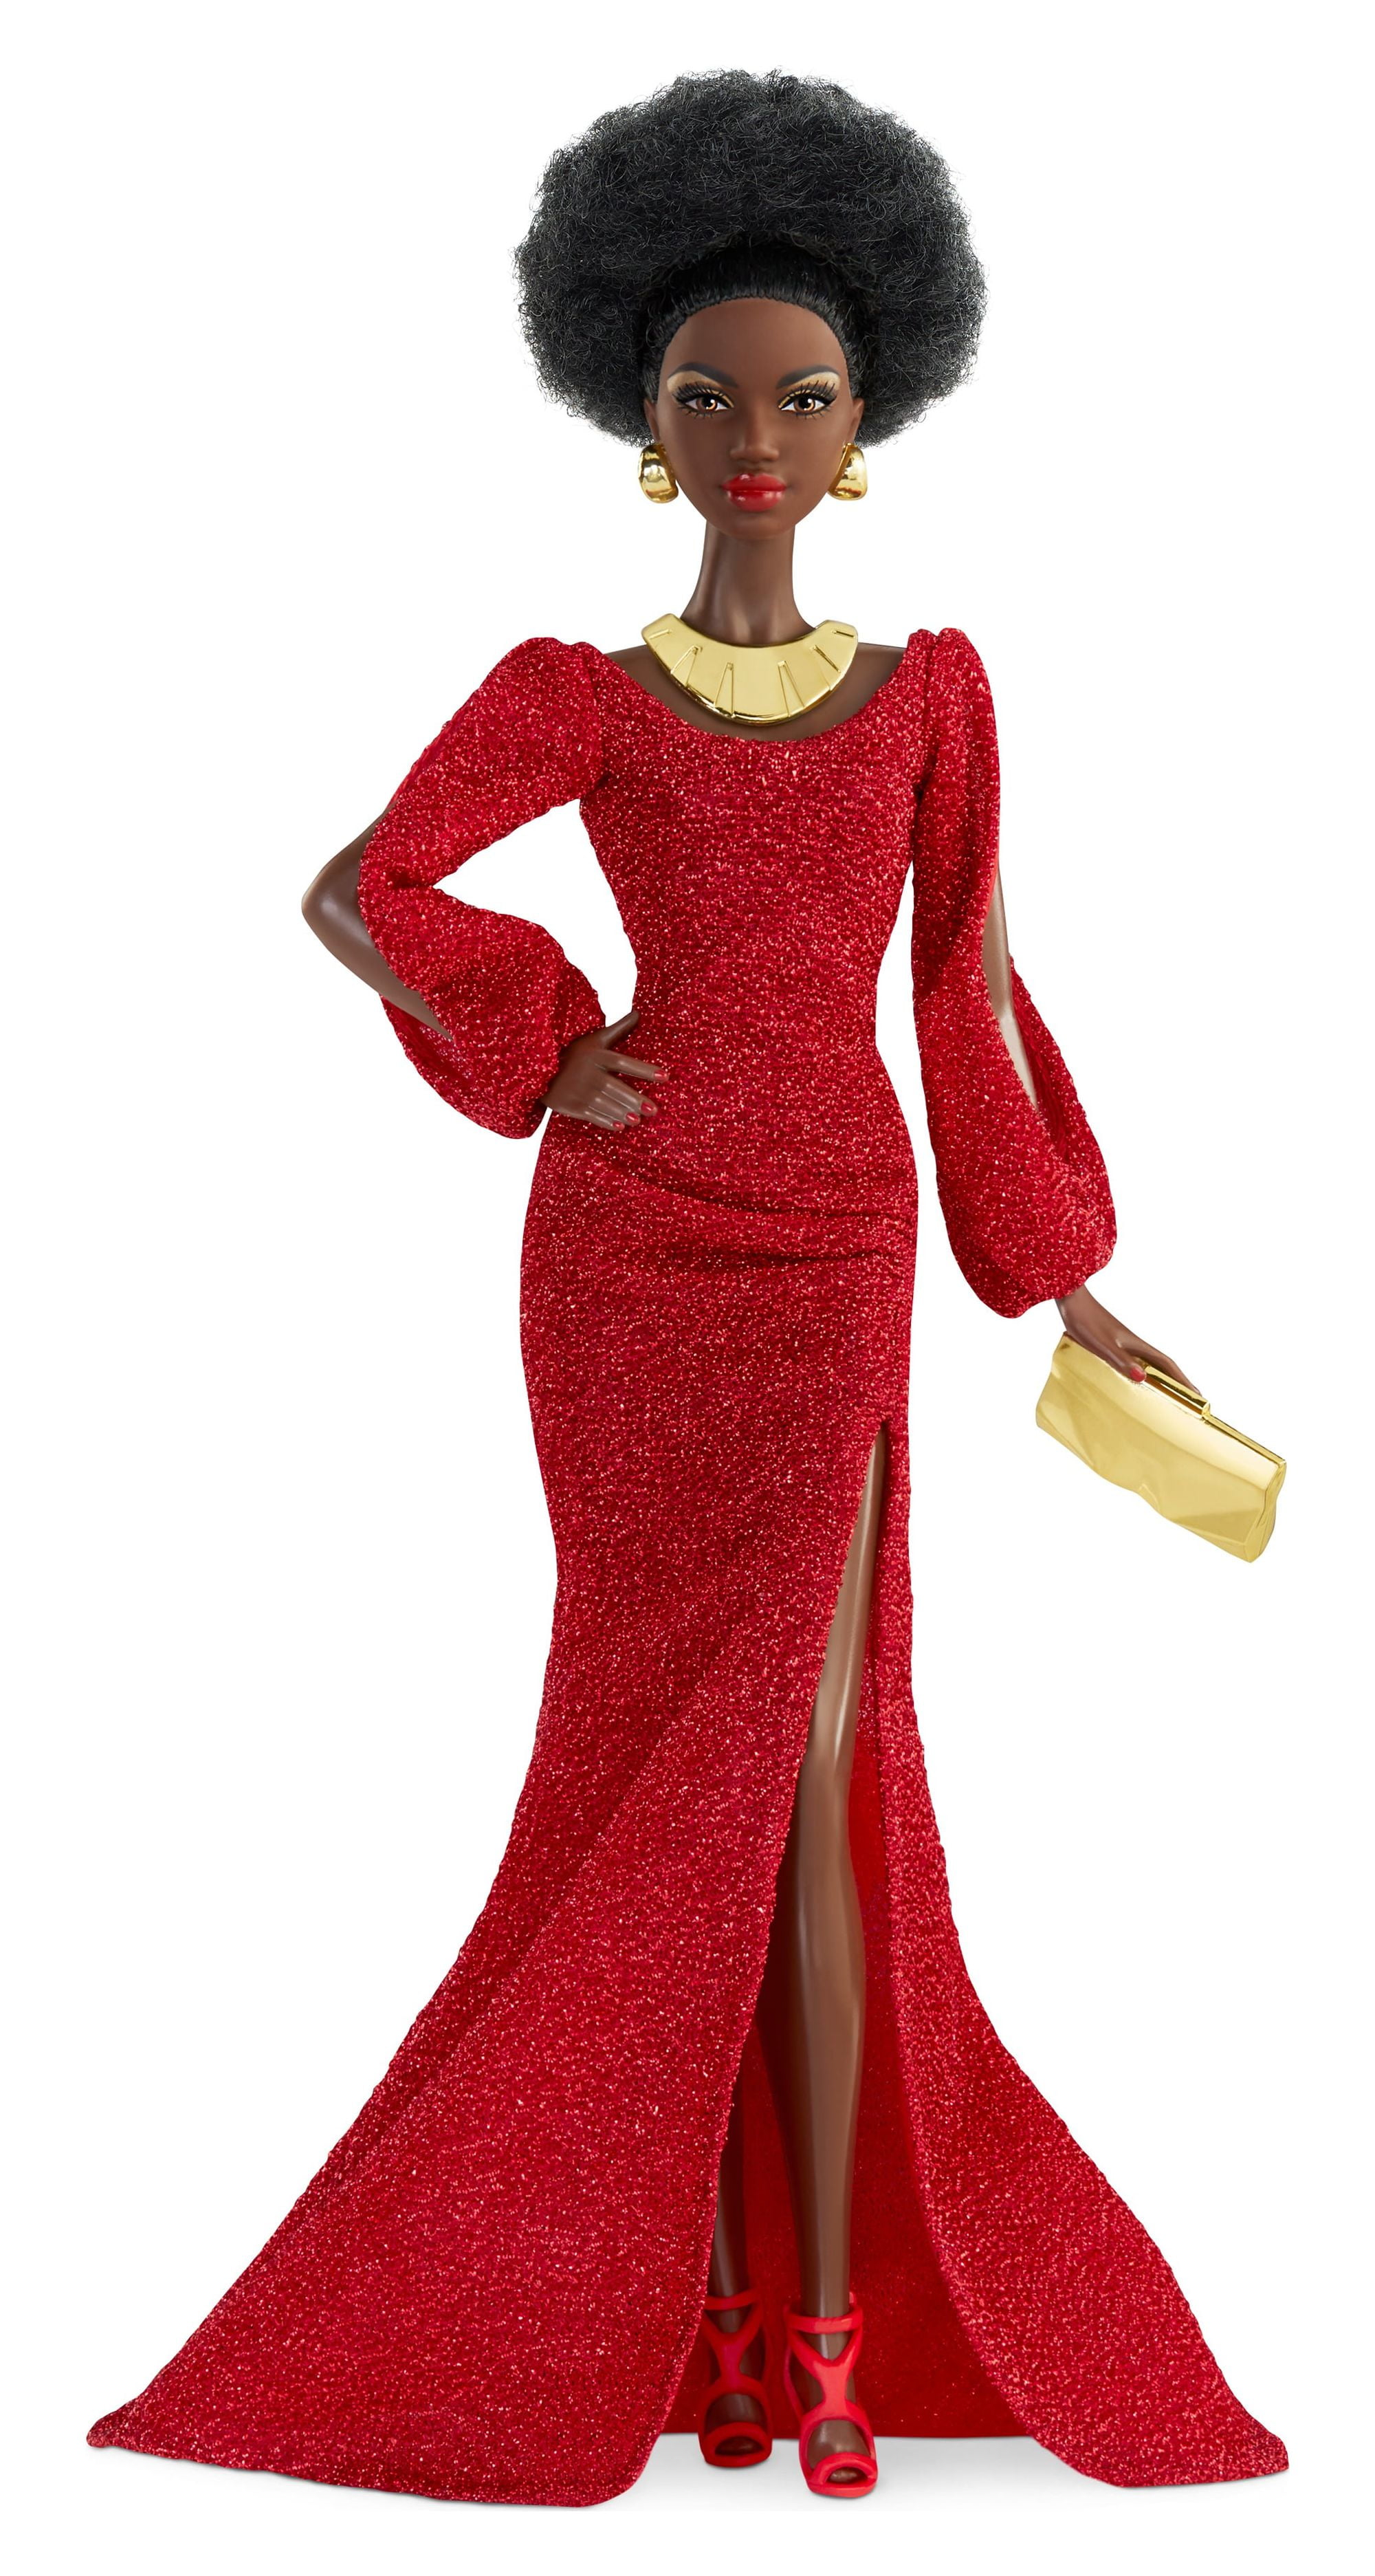 Barbie Signature 40th Anniversary First Black Barbie Doll in Red